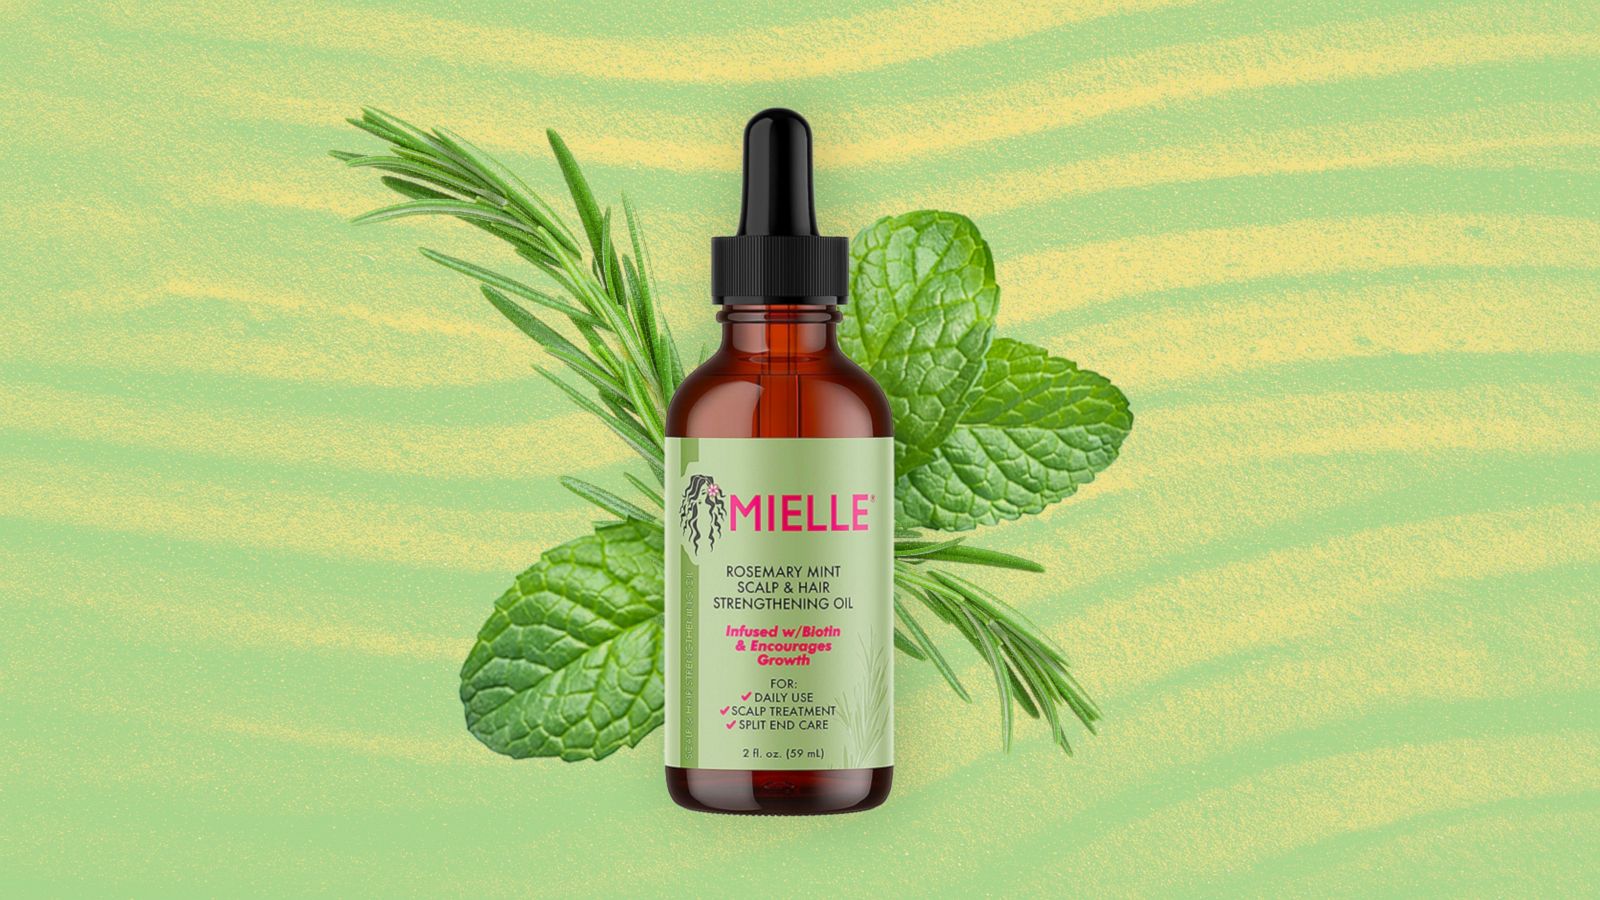 My Mielle Rosemary Mint Scalp & Strengthening Oil Product Review